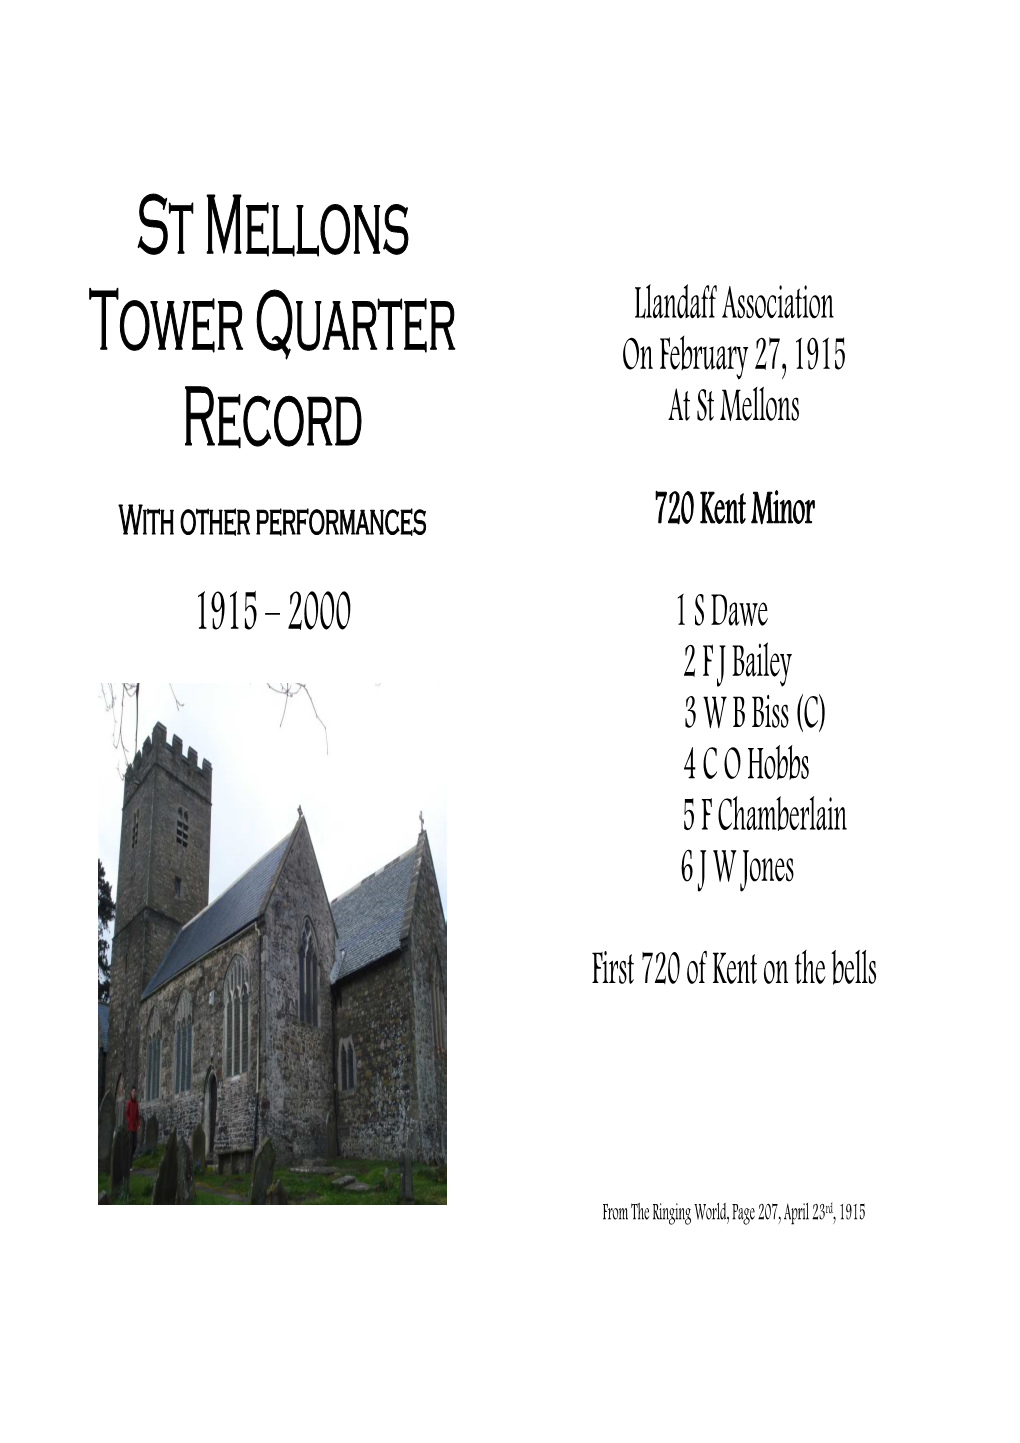 St Mellons Tower Quarter Record